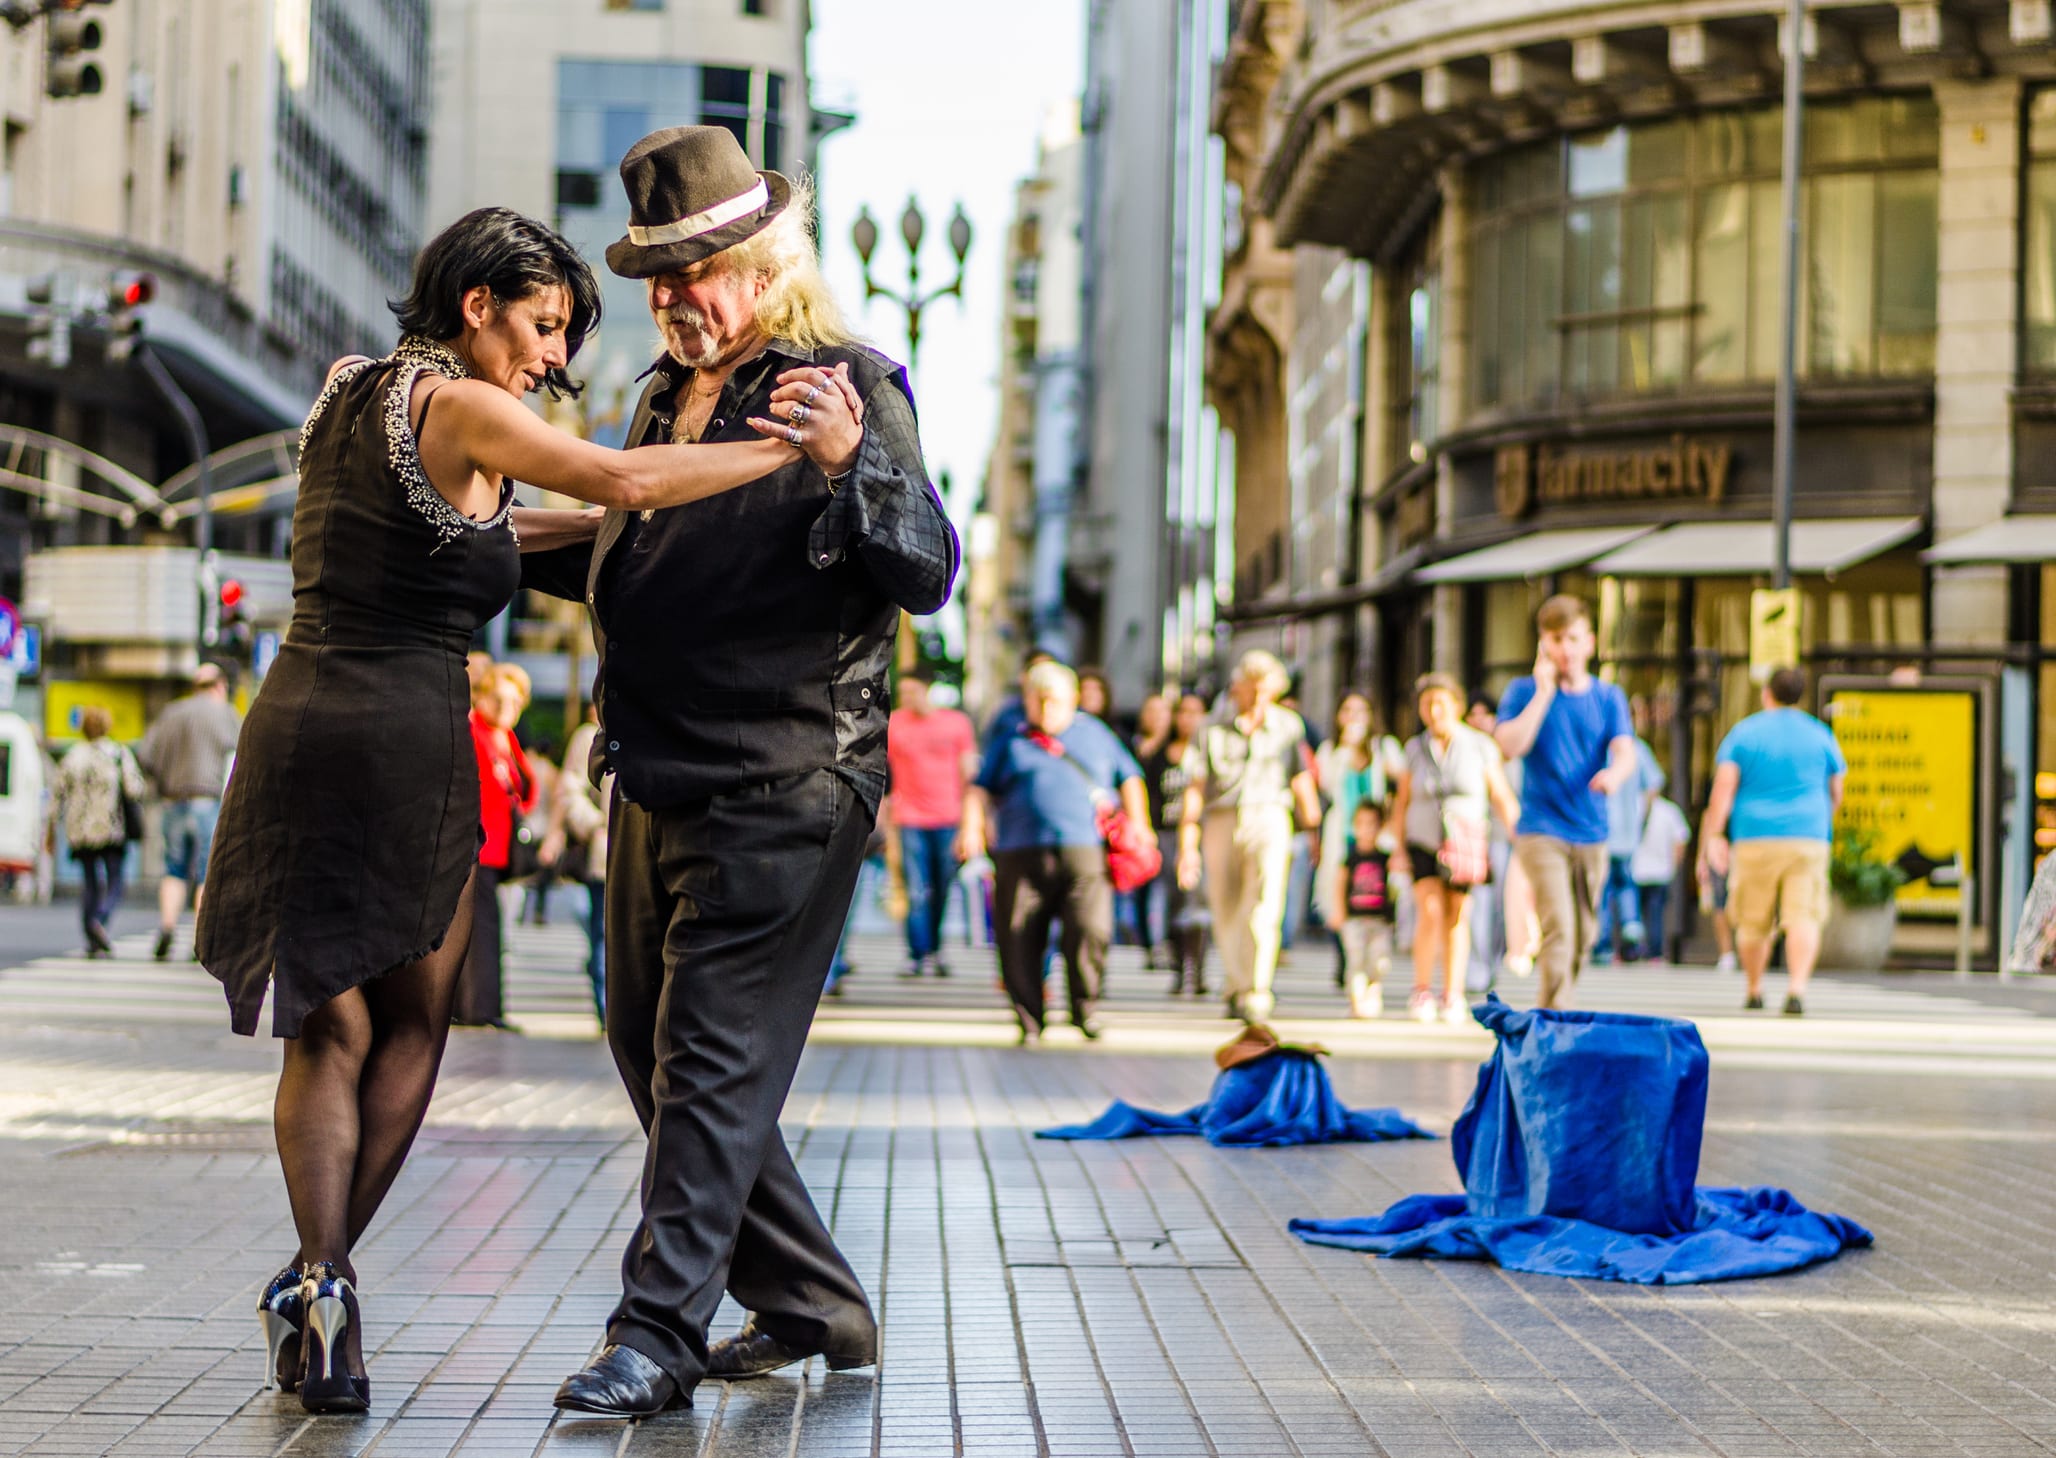 Buenos Aires, Argentina â€“ July 11, 2016: Unidentified tango dancers